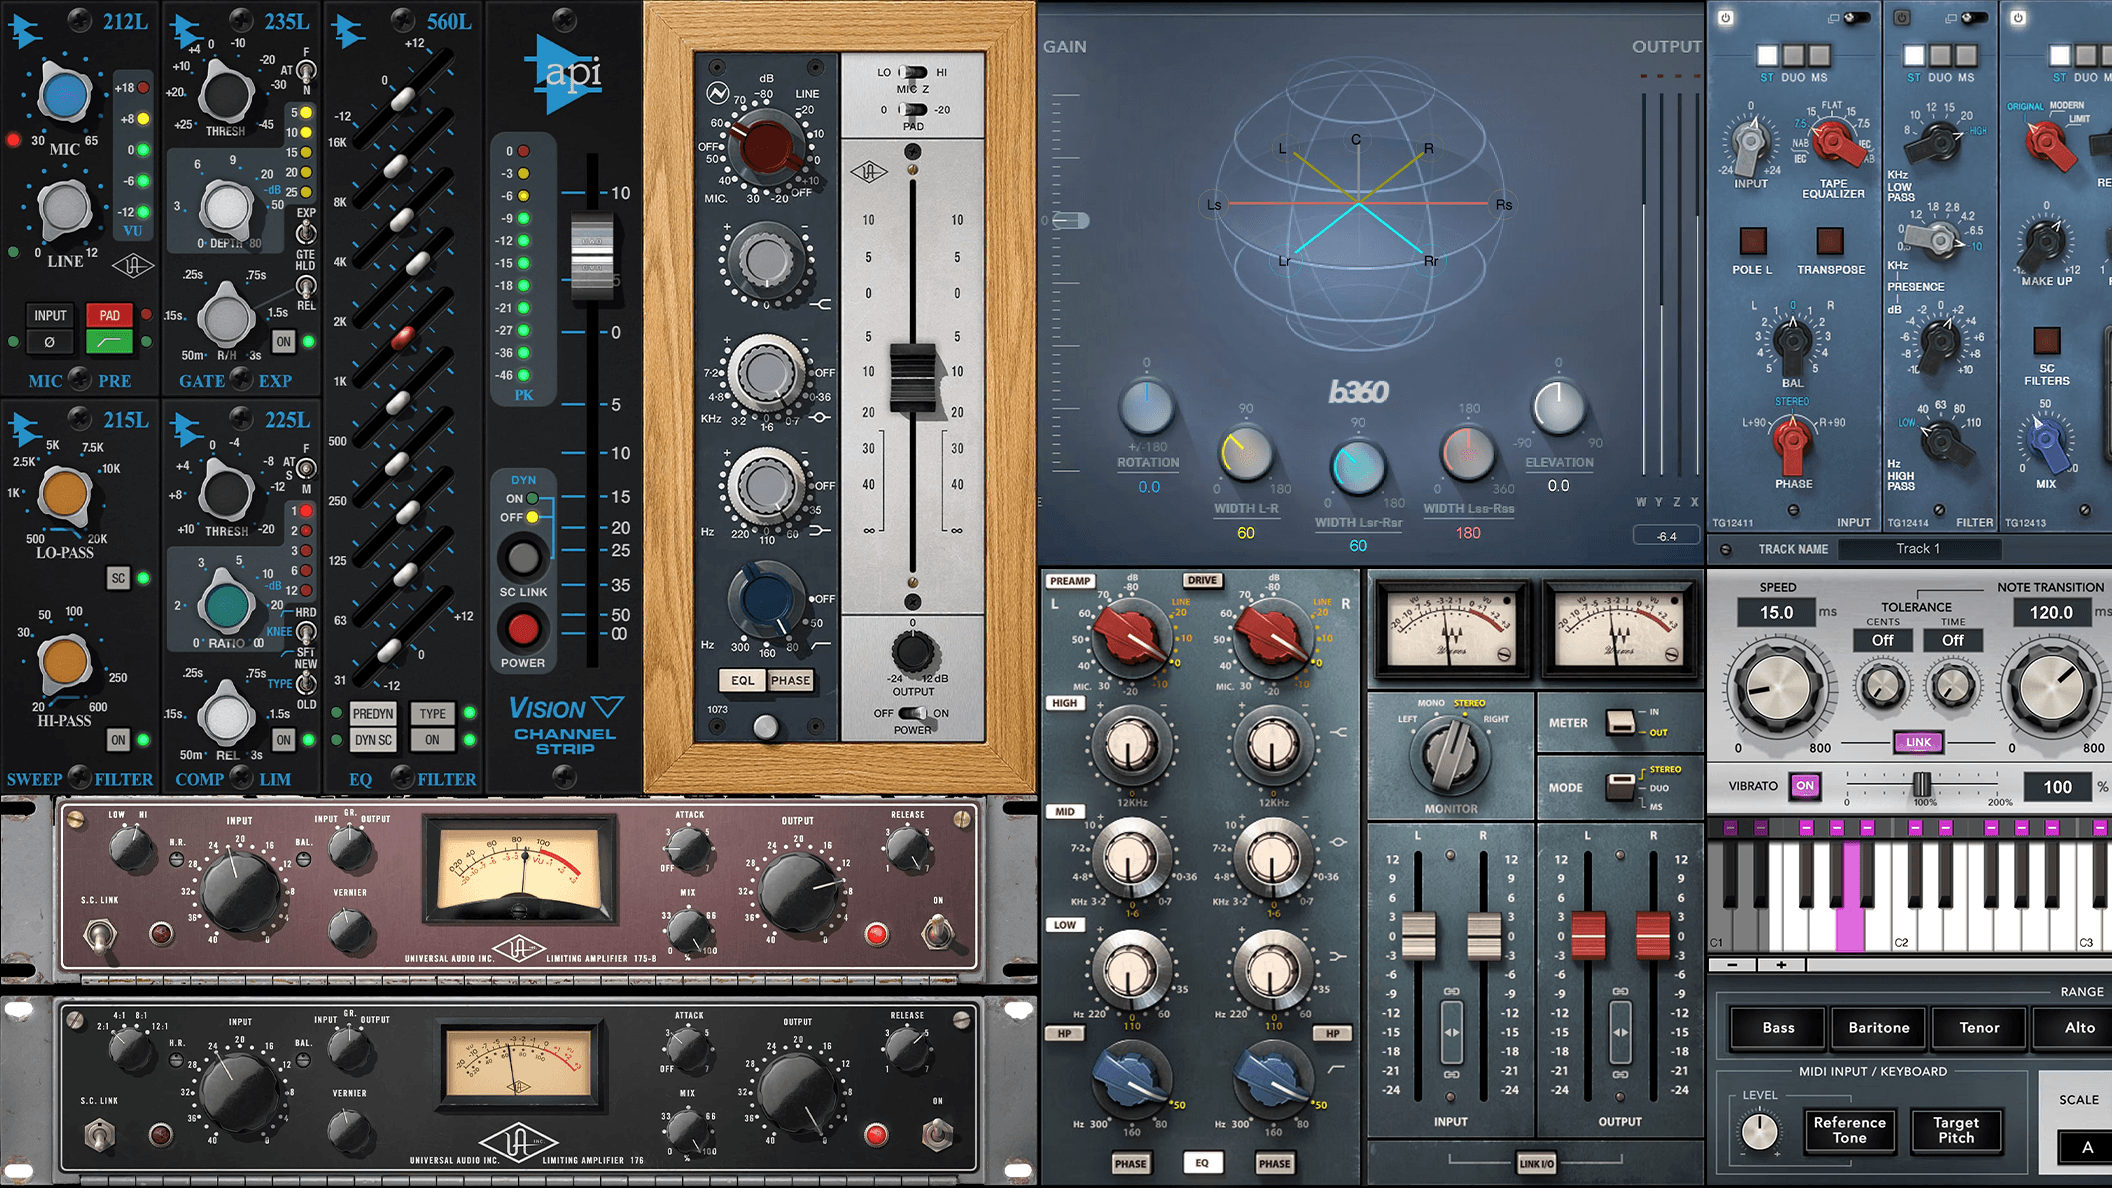 Collage of diverse audio control devices, highlighting Screenberry's advanced audio capabilities